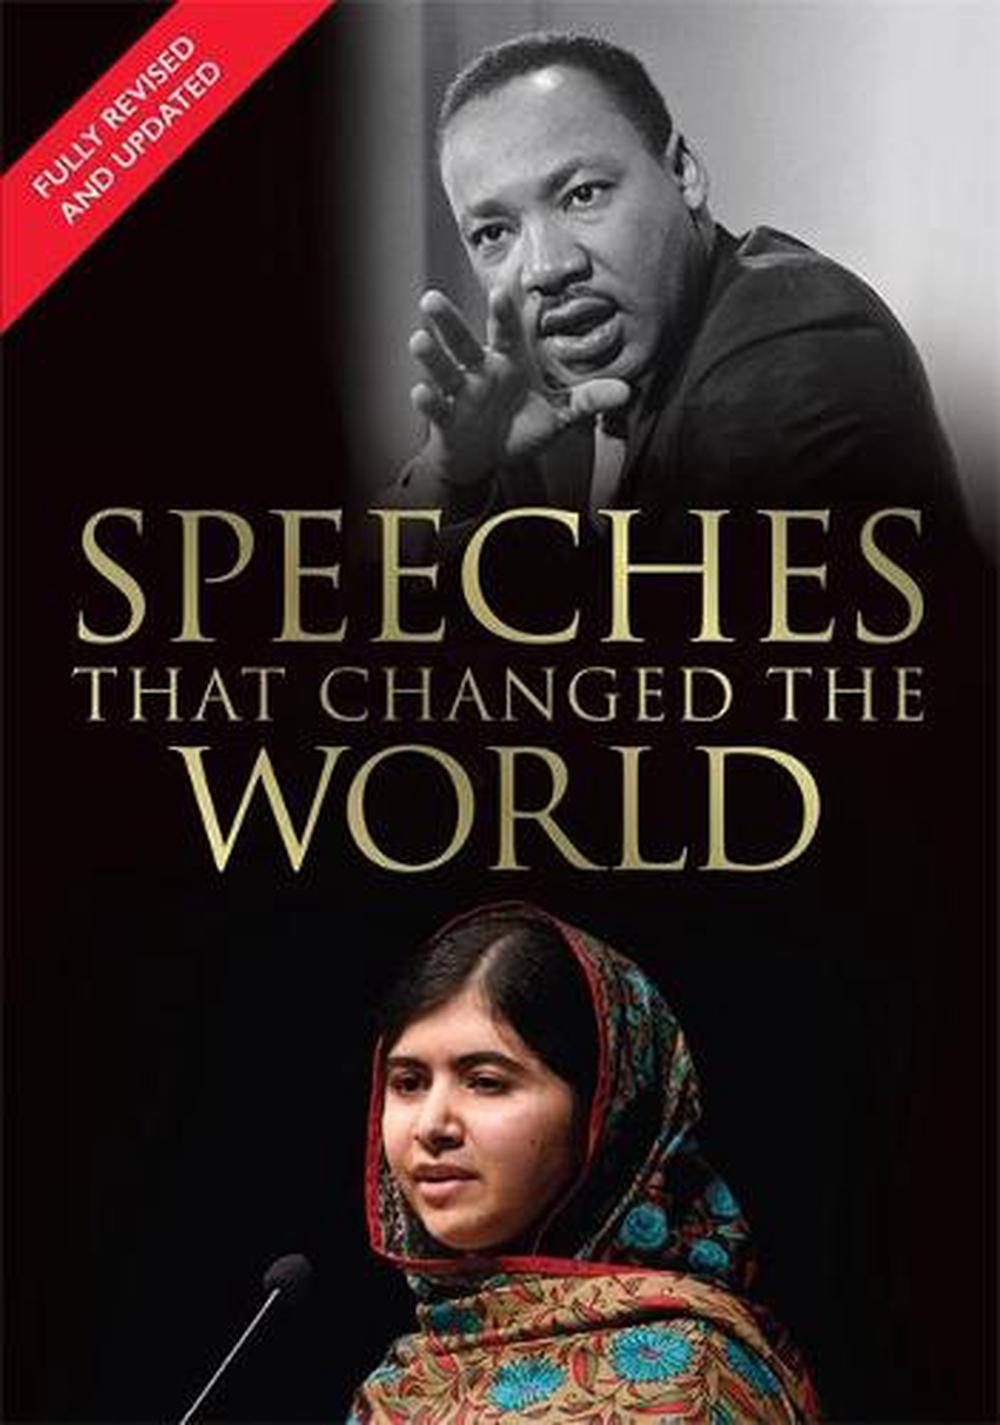 3 famous speeches that changed the world